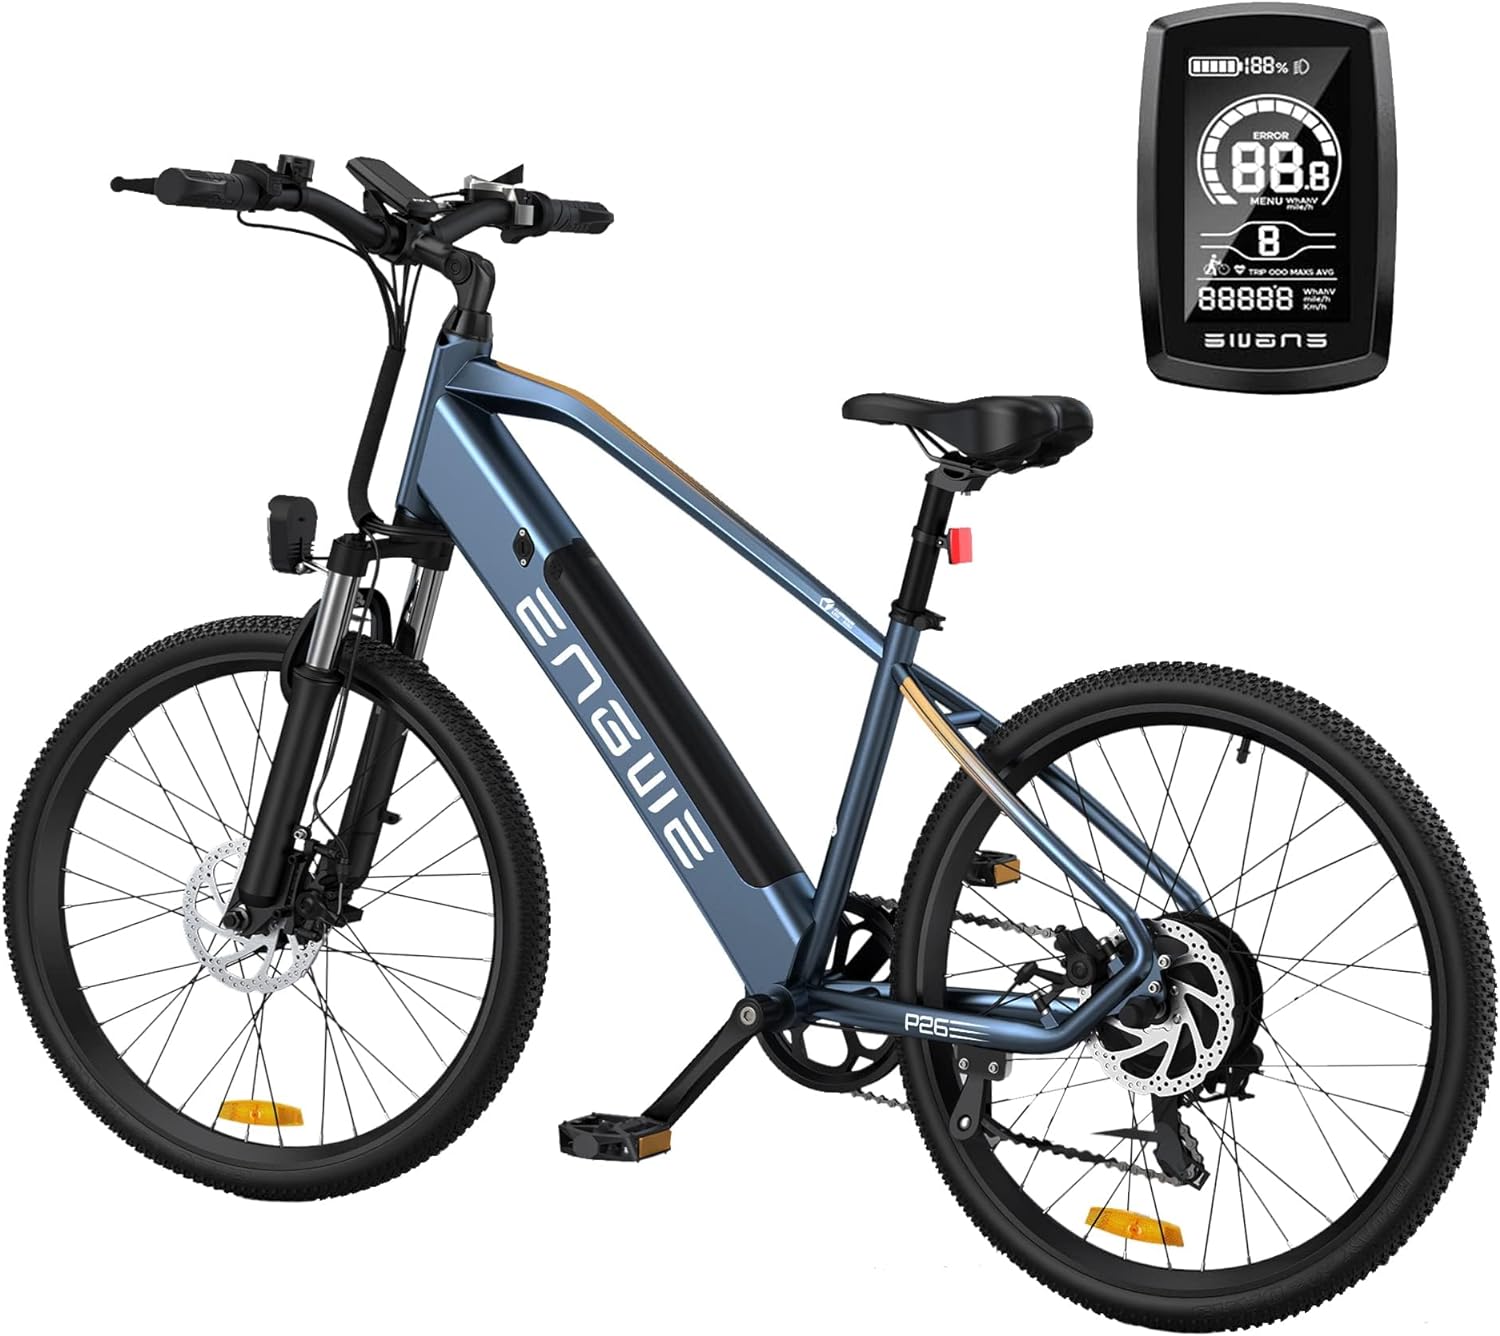 ENGWE-P26 Electric-Bikes 26" Electric-Commuter-Bikes-Adults - Peak 800W Cruiser-Electric-Bikes Motor 48V 13.6Ah Removable Battery, Top Speed 25MPH, Intelligent LCD Display, Gray